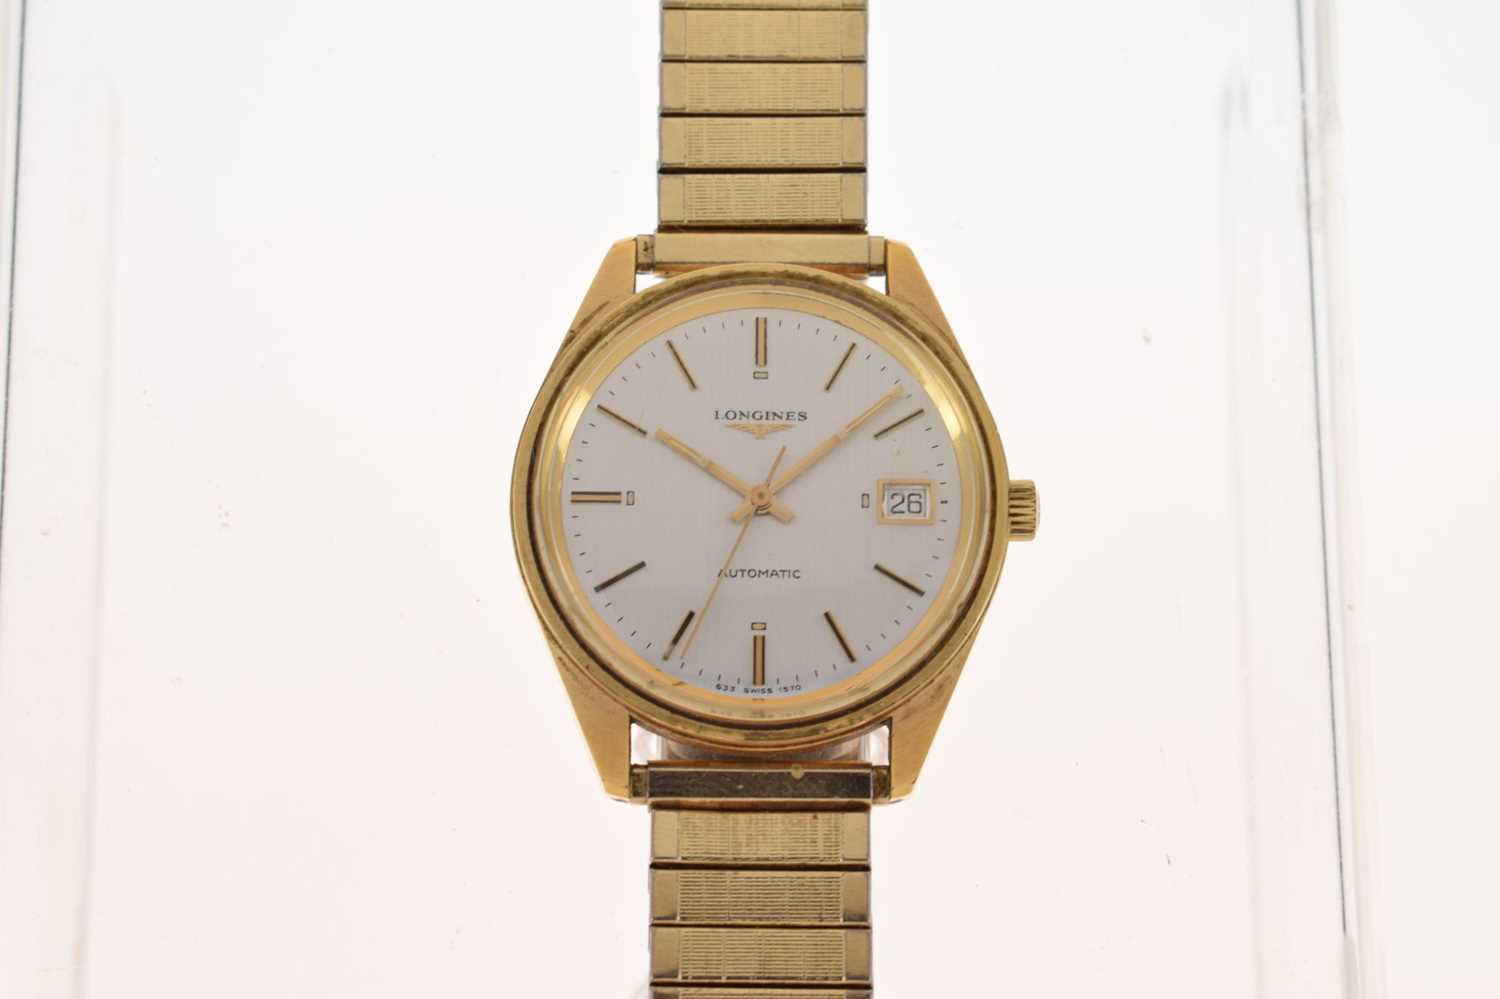 Longines - Gentleman's gold plated automatic bracelet watch - Image 7 of 8